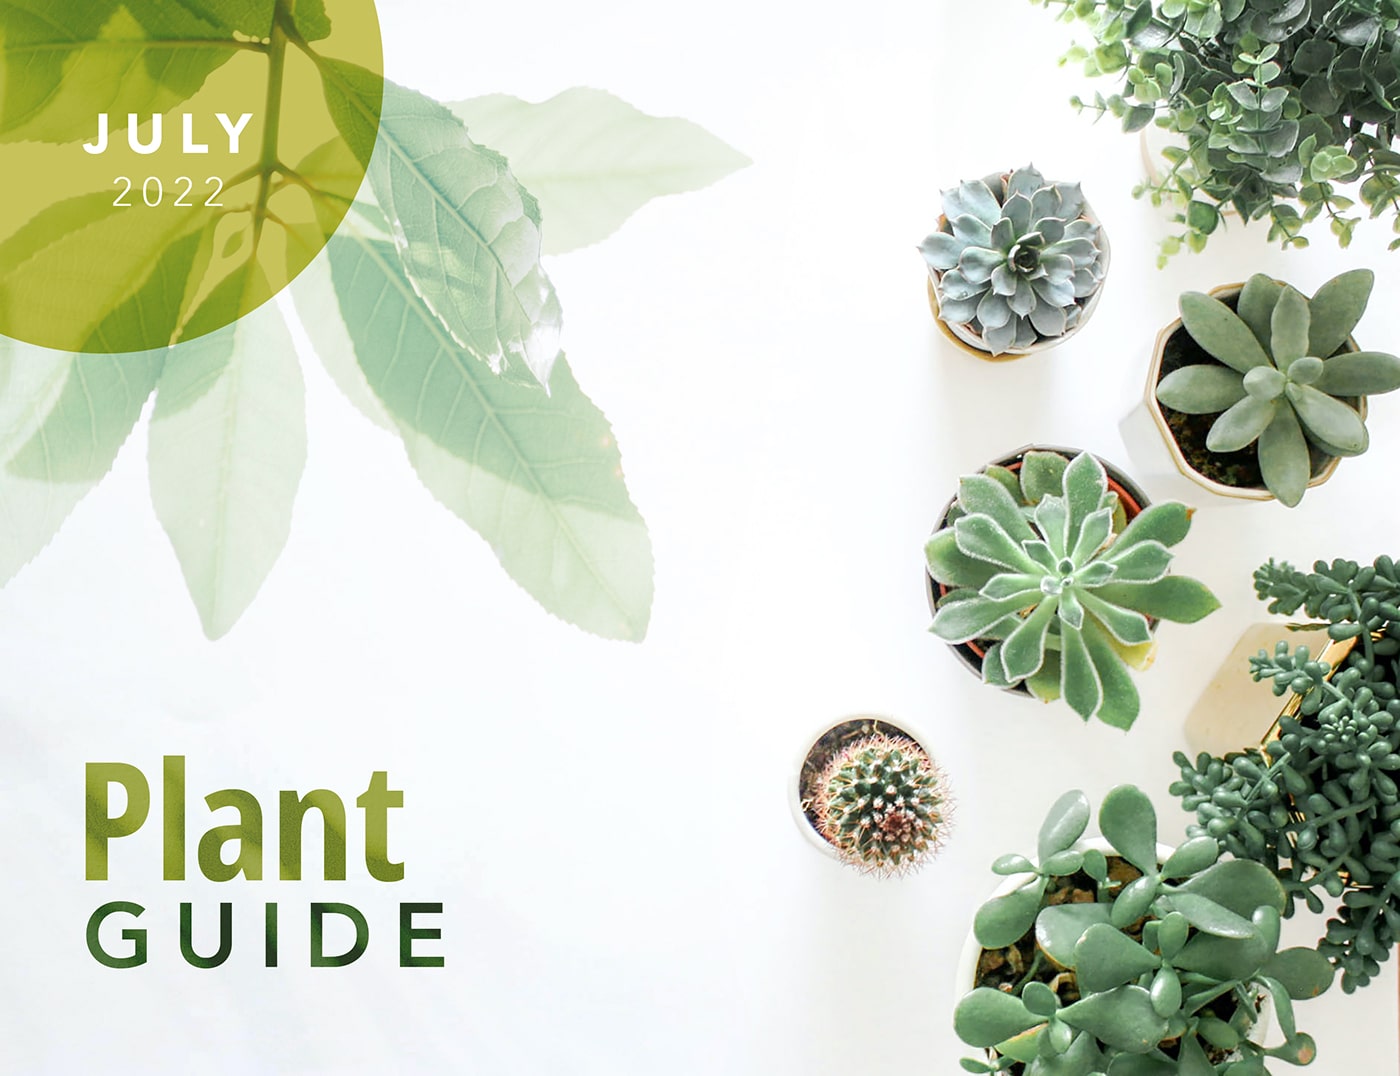 Plant guide cover for July 2022 with various plants displaying.